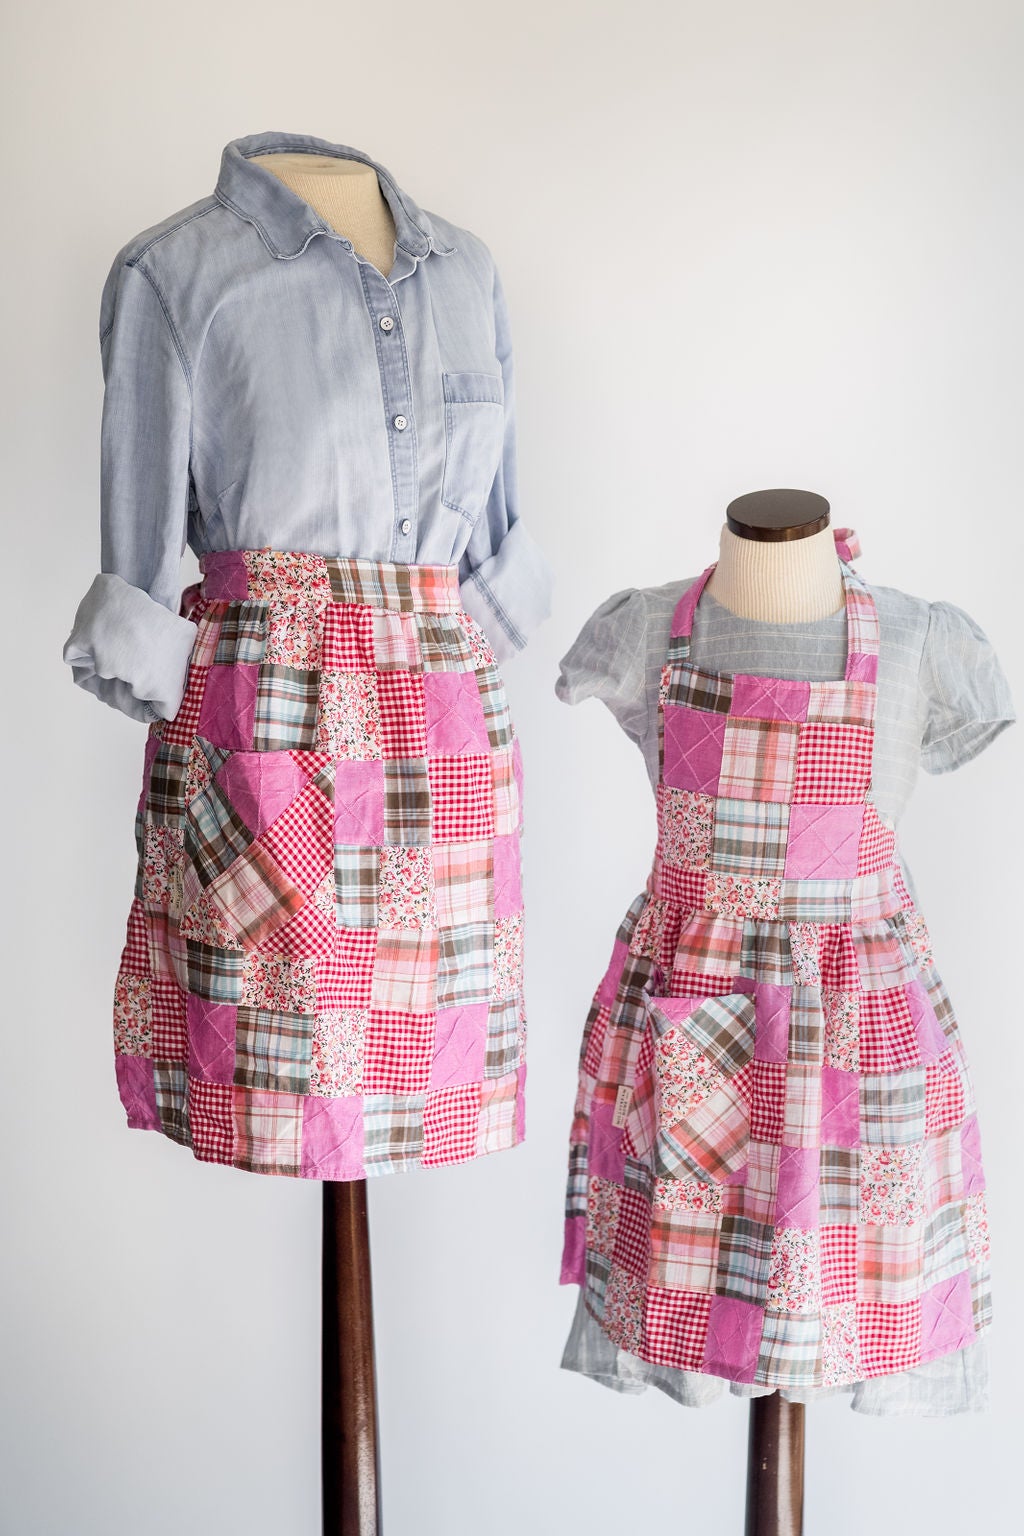 The Adult Quilted Patchwork Apron on a Mannequin